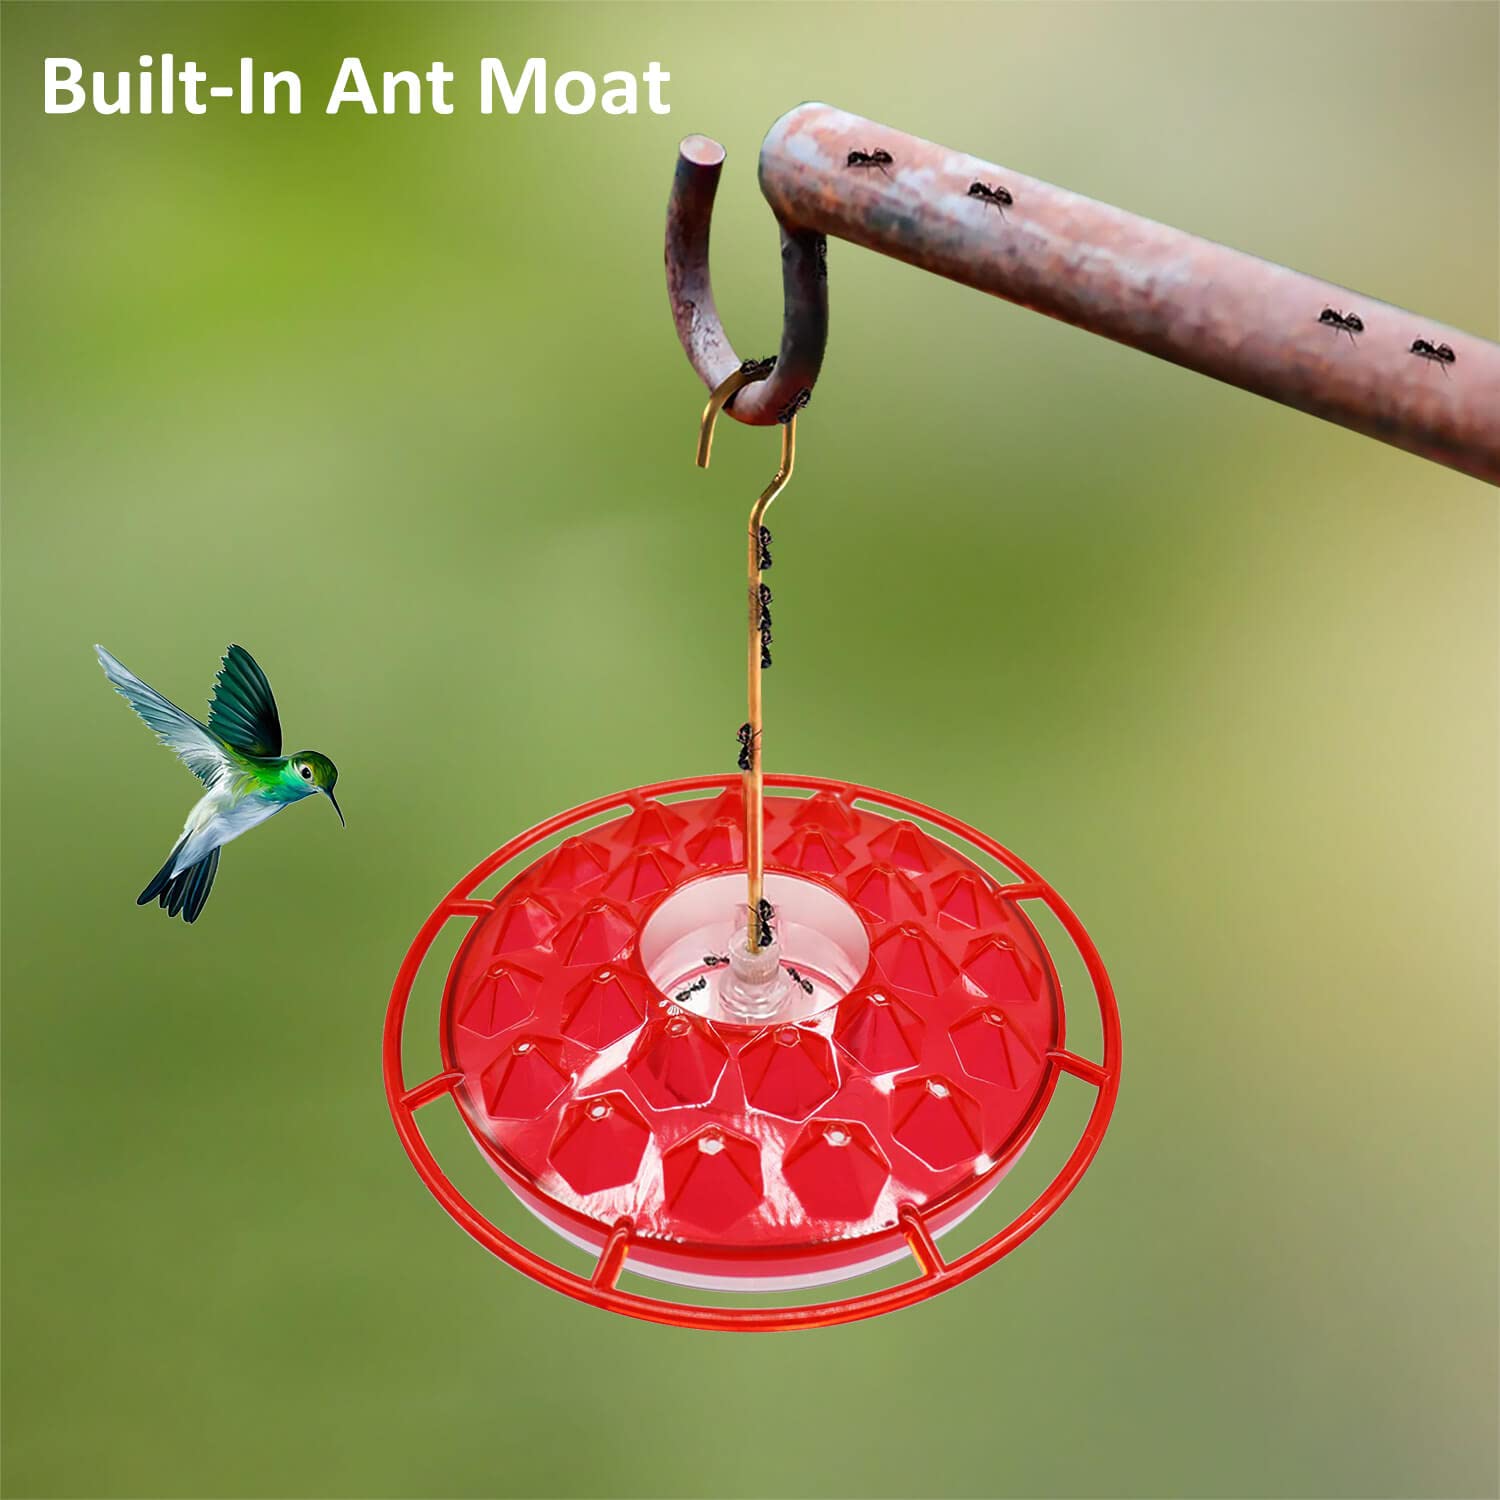 Hummingbird Feeders for Outdoors Hanging - 10 oz, 25 Feeding Ports, Easy to Install, Refill & Clean, Leak-Proof, Plastic Saucer Hummingbird Feeders with Cleaning Brushes